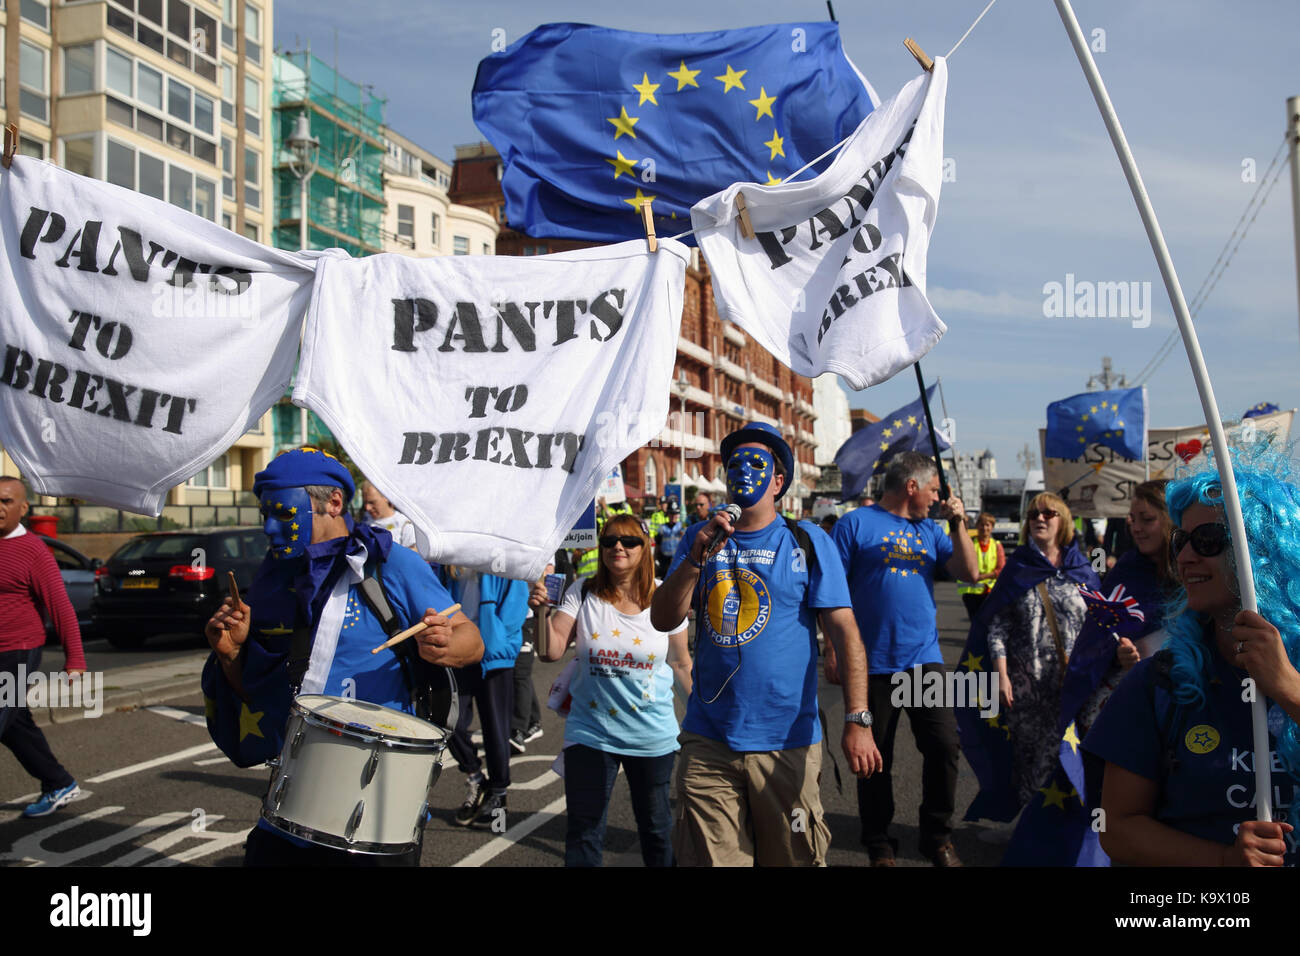 Brighton, UK. 24th September, 2017. Pro European Union supporters demonstrate during a protest against Brexit in Brighton, UK, Sunday, September 24, 2017. Protesters rallied outside the annual Labour Party Conference being held in Brighton and attended by the opposition leader Jeremy Corbyn. Photograph : Credit: Luke MacGregor/Alamy Live News Stock Photo